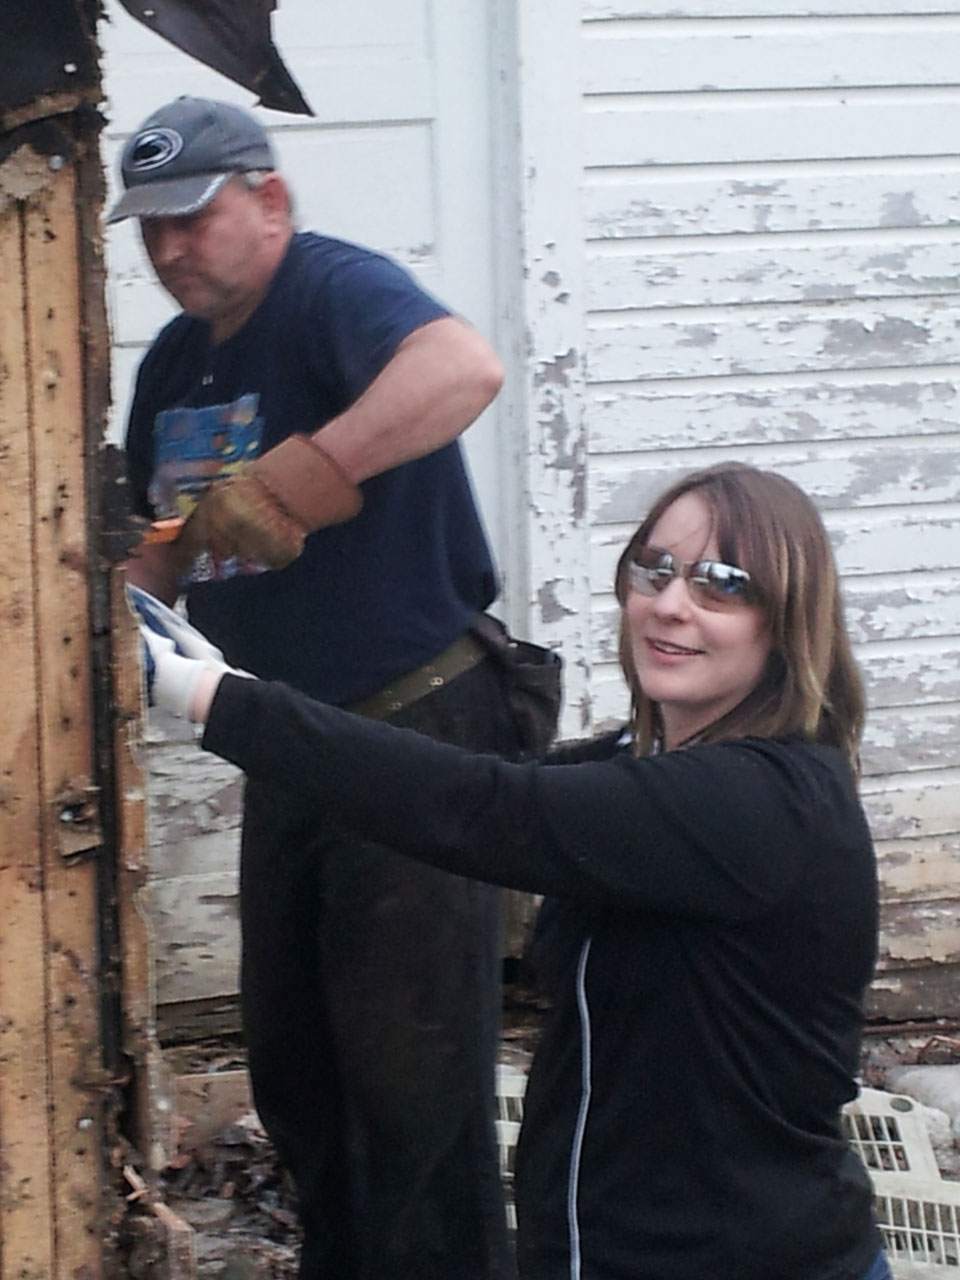 Dan and his daughter/nominator, Ashley tearing down an old garage.